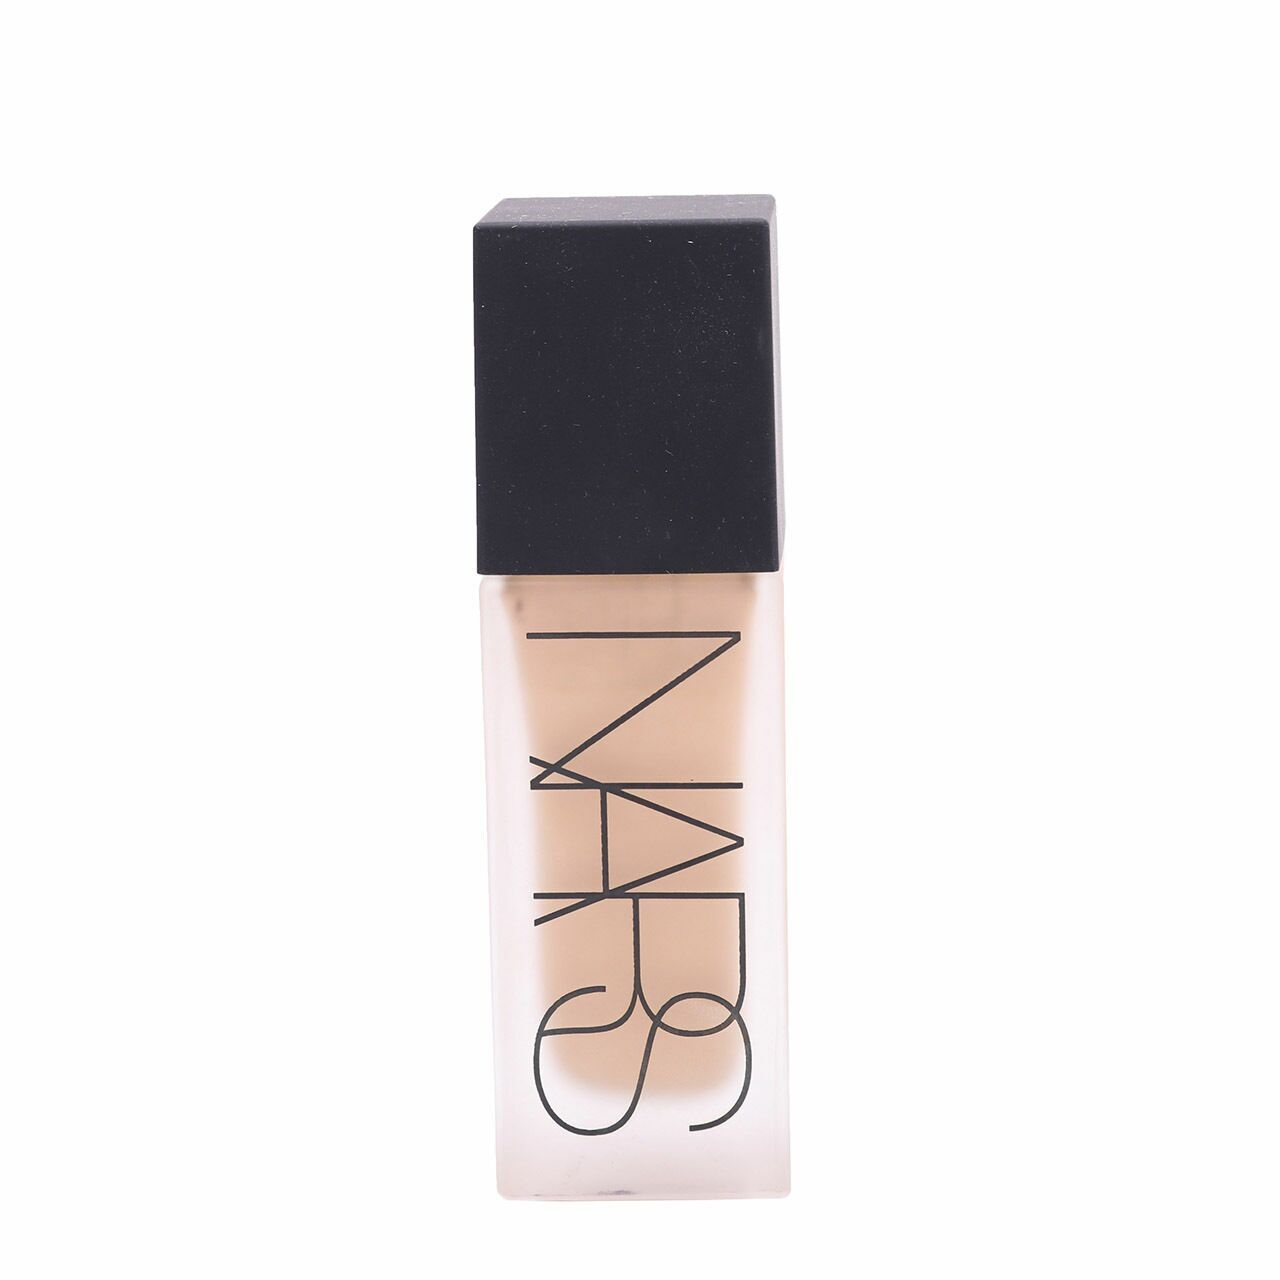 NARS Light 4 All Day Luminous Weighless Foundation